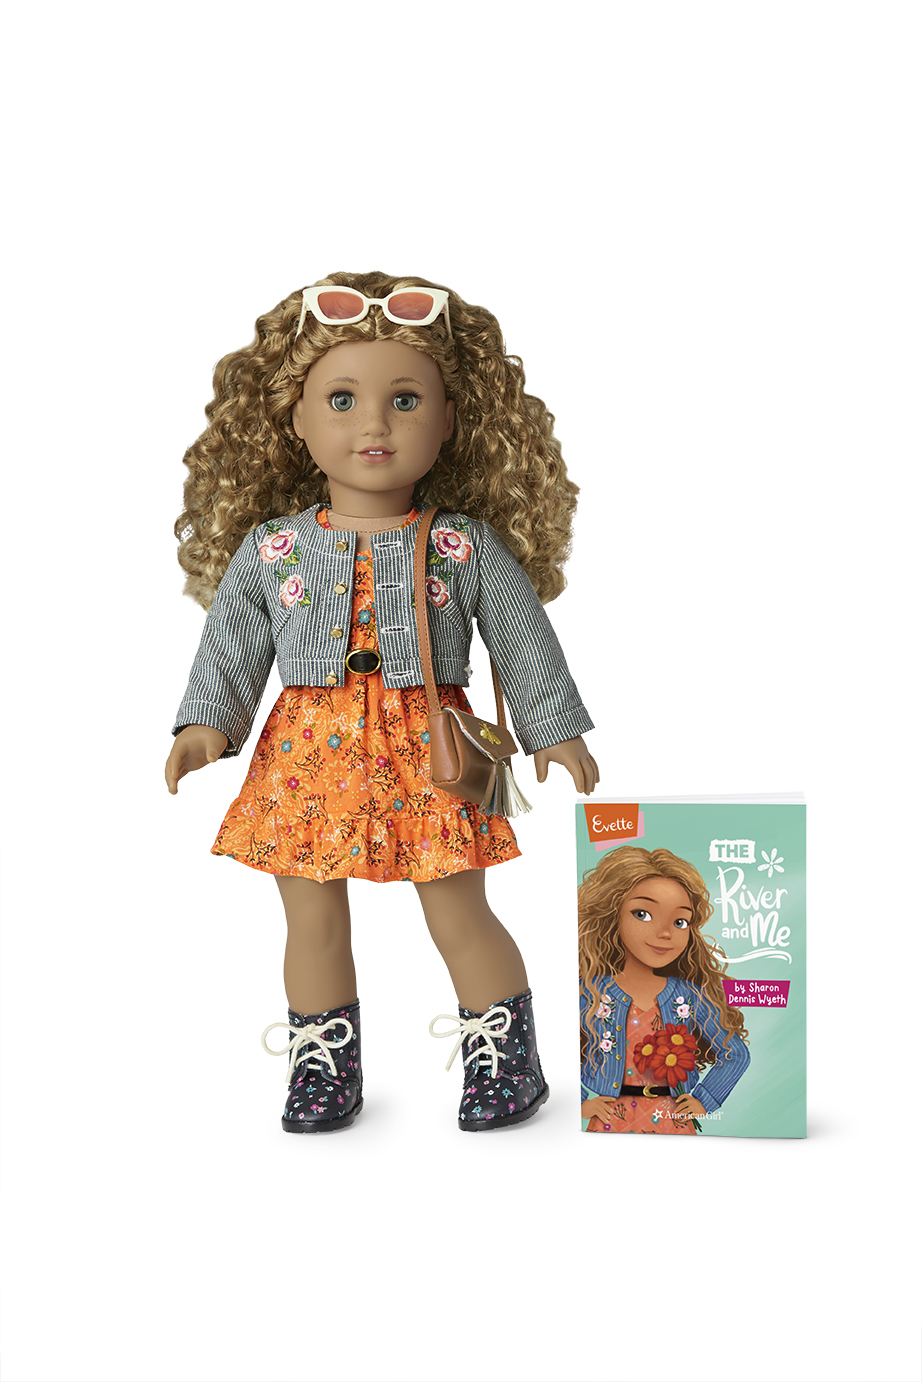 Evette Peeters Doll, Book and Accessories